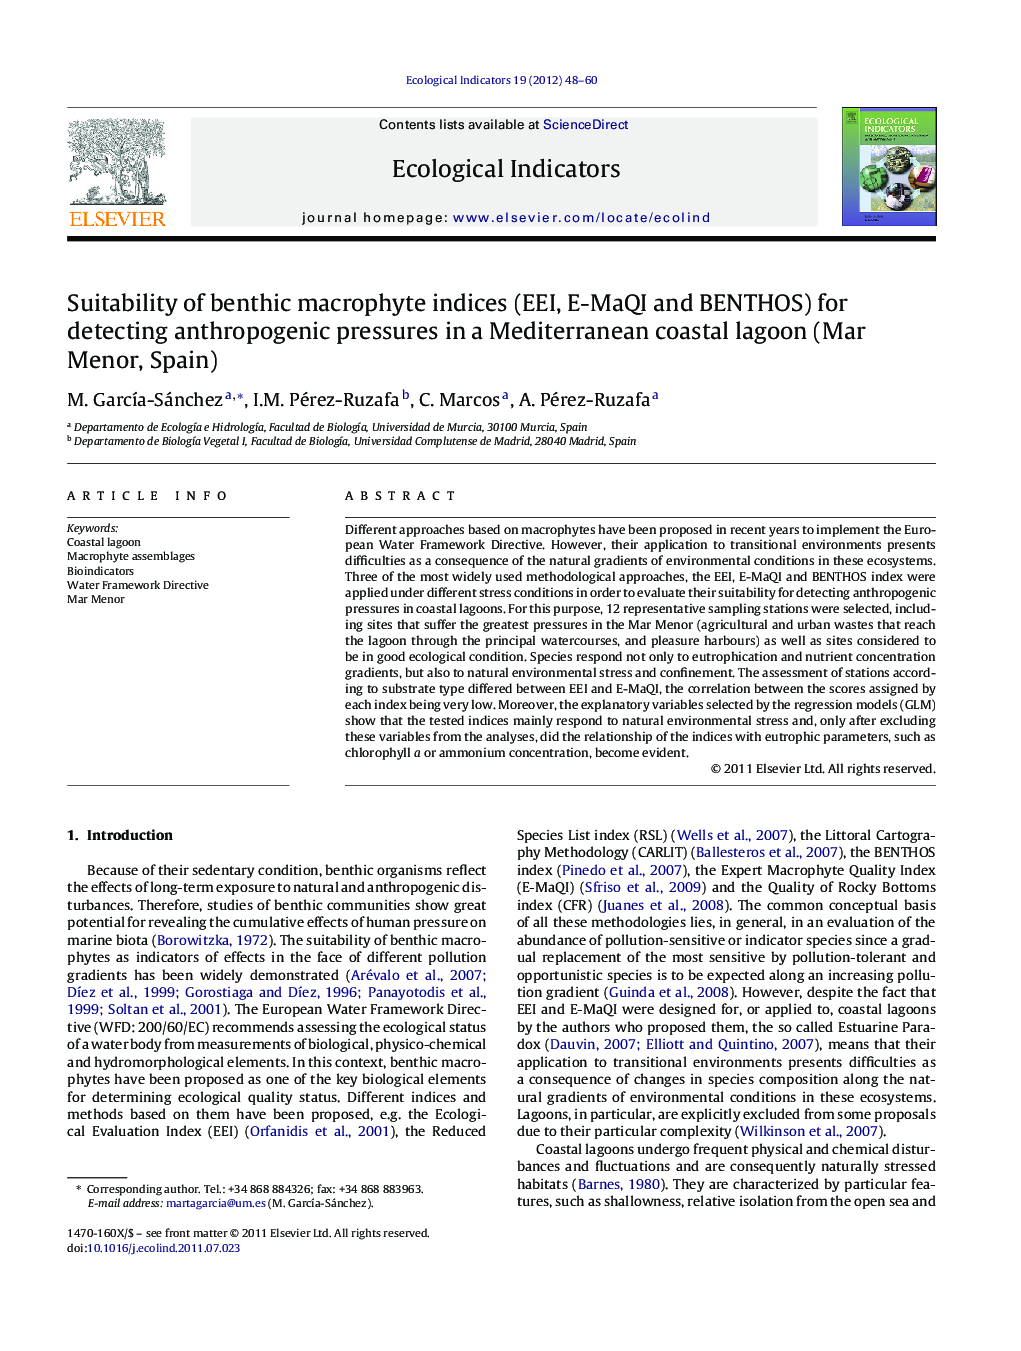 Suitability of benthic macrophyte indices (EEI, E-MaQI and BENTHOS) for detecting anthropogenic pressures in a Mediterranean coastal lagoon (Mar Menor, Spain)